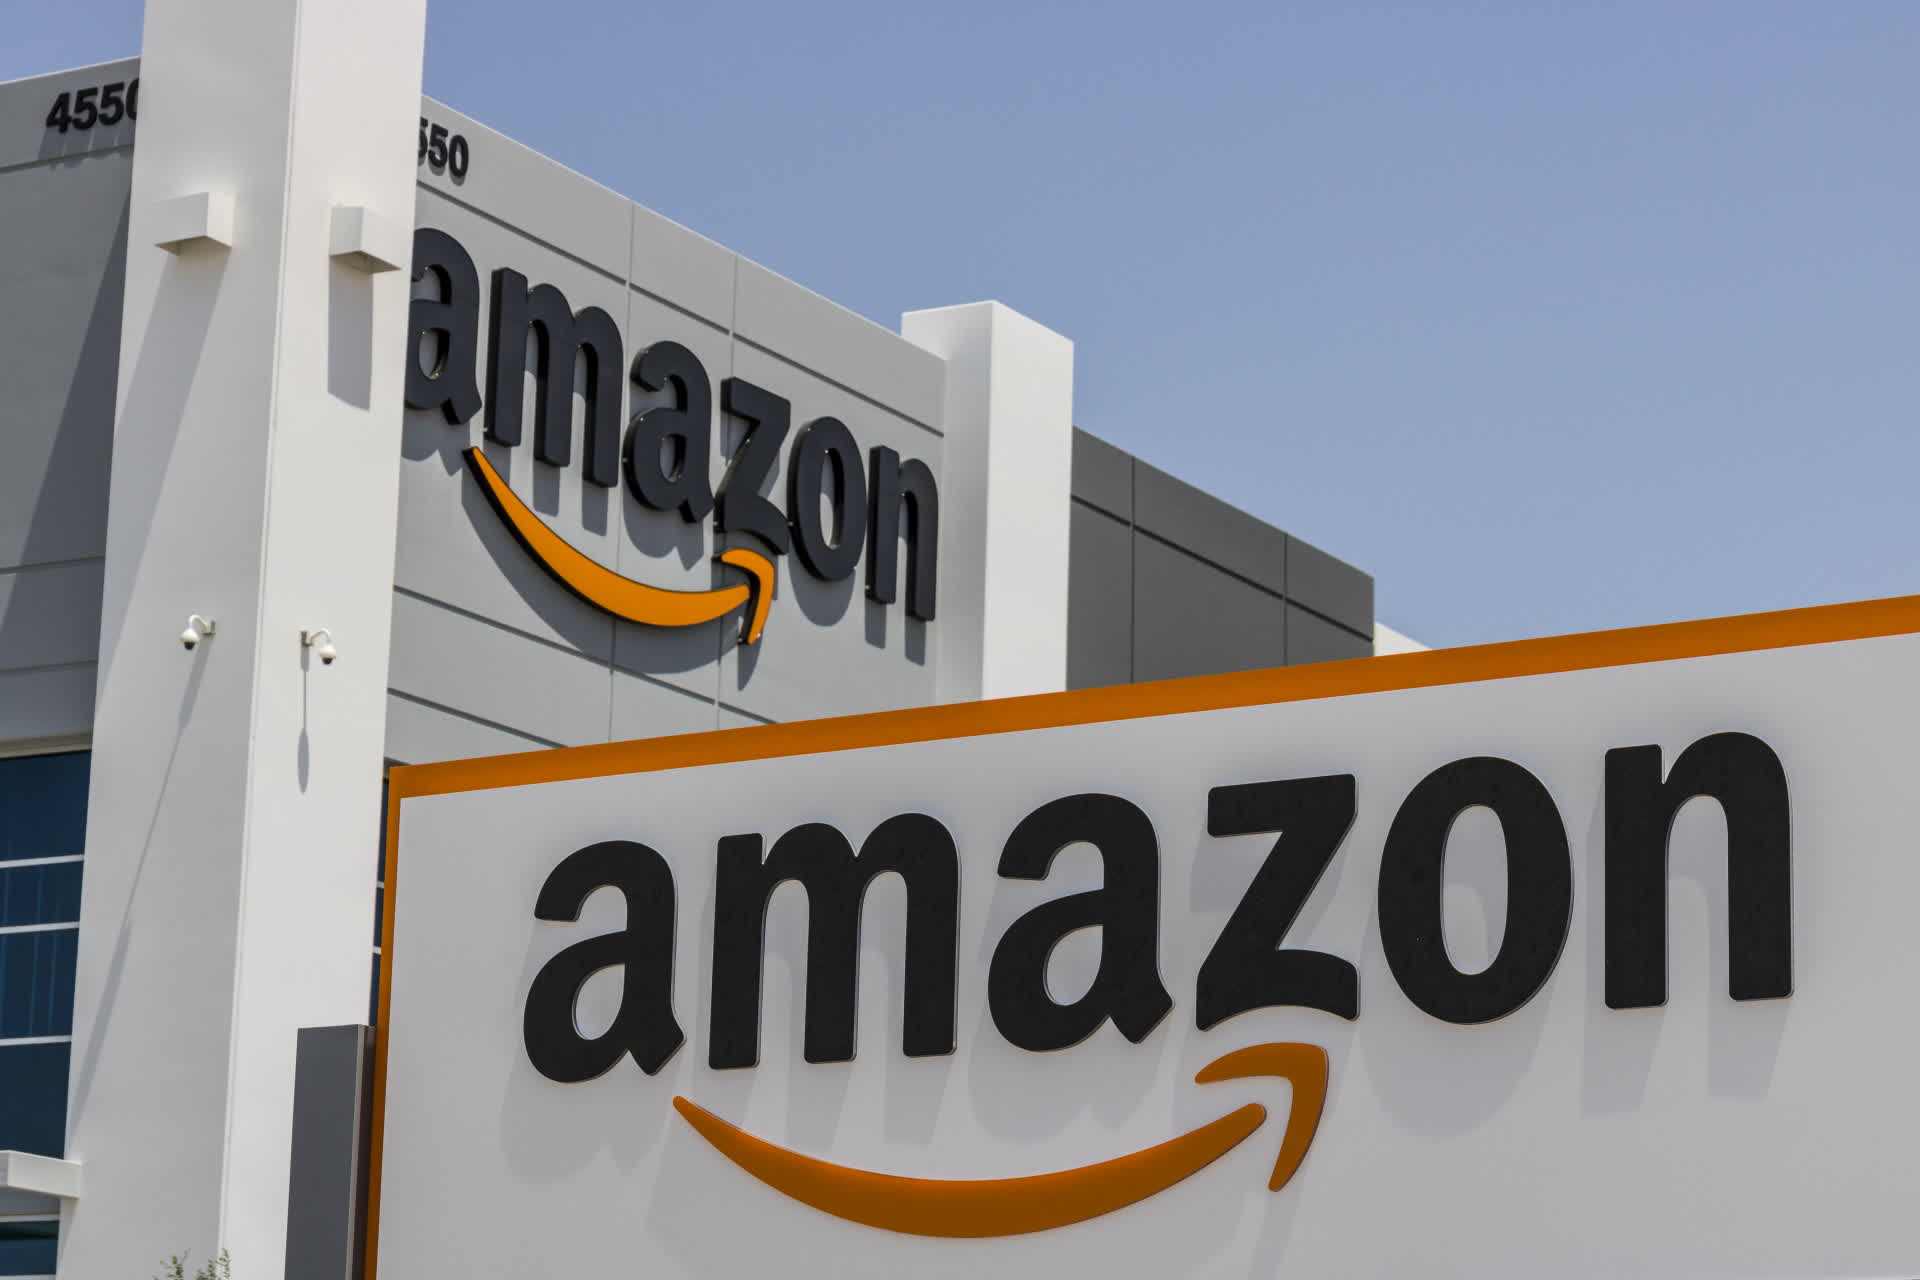 Amazon employees rage against return-to-office mandate as exec pleads for calm